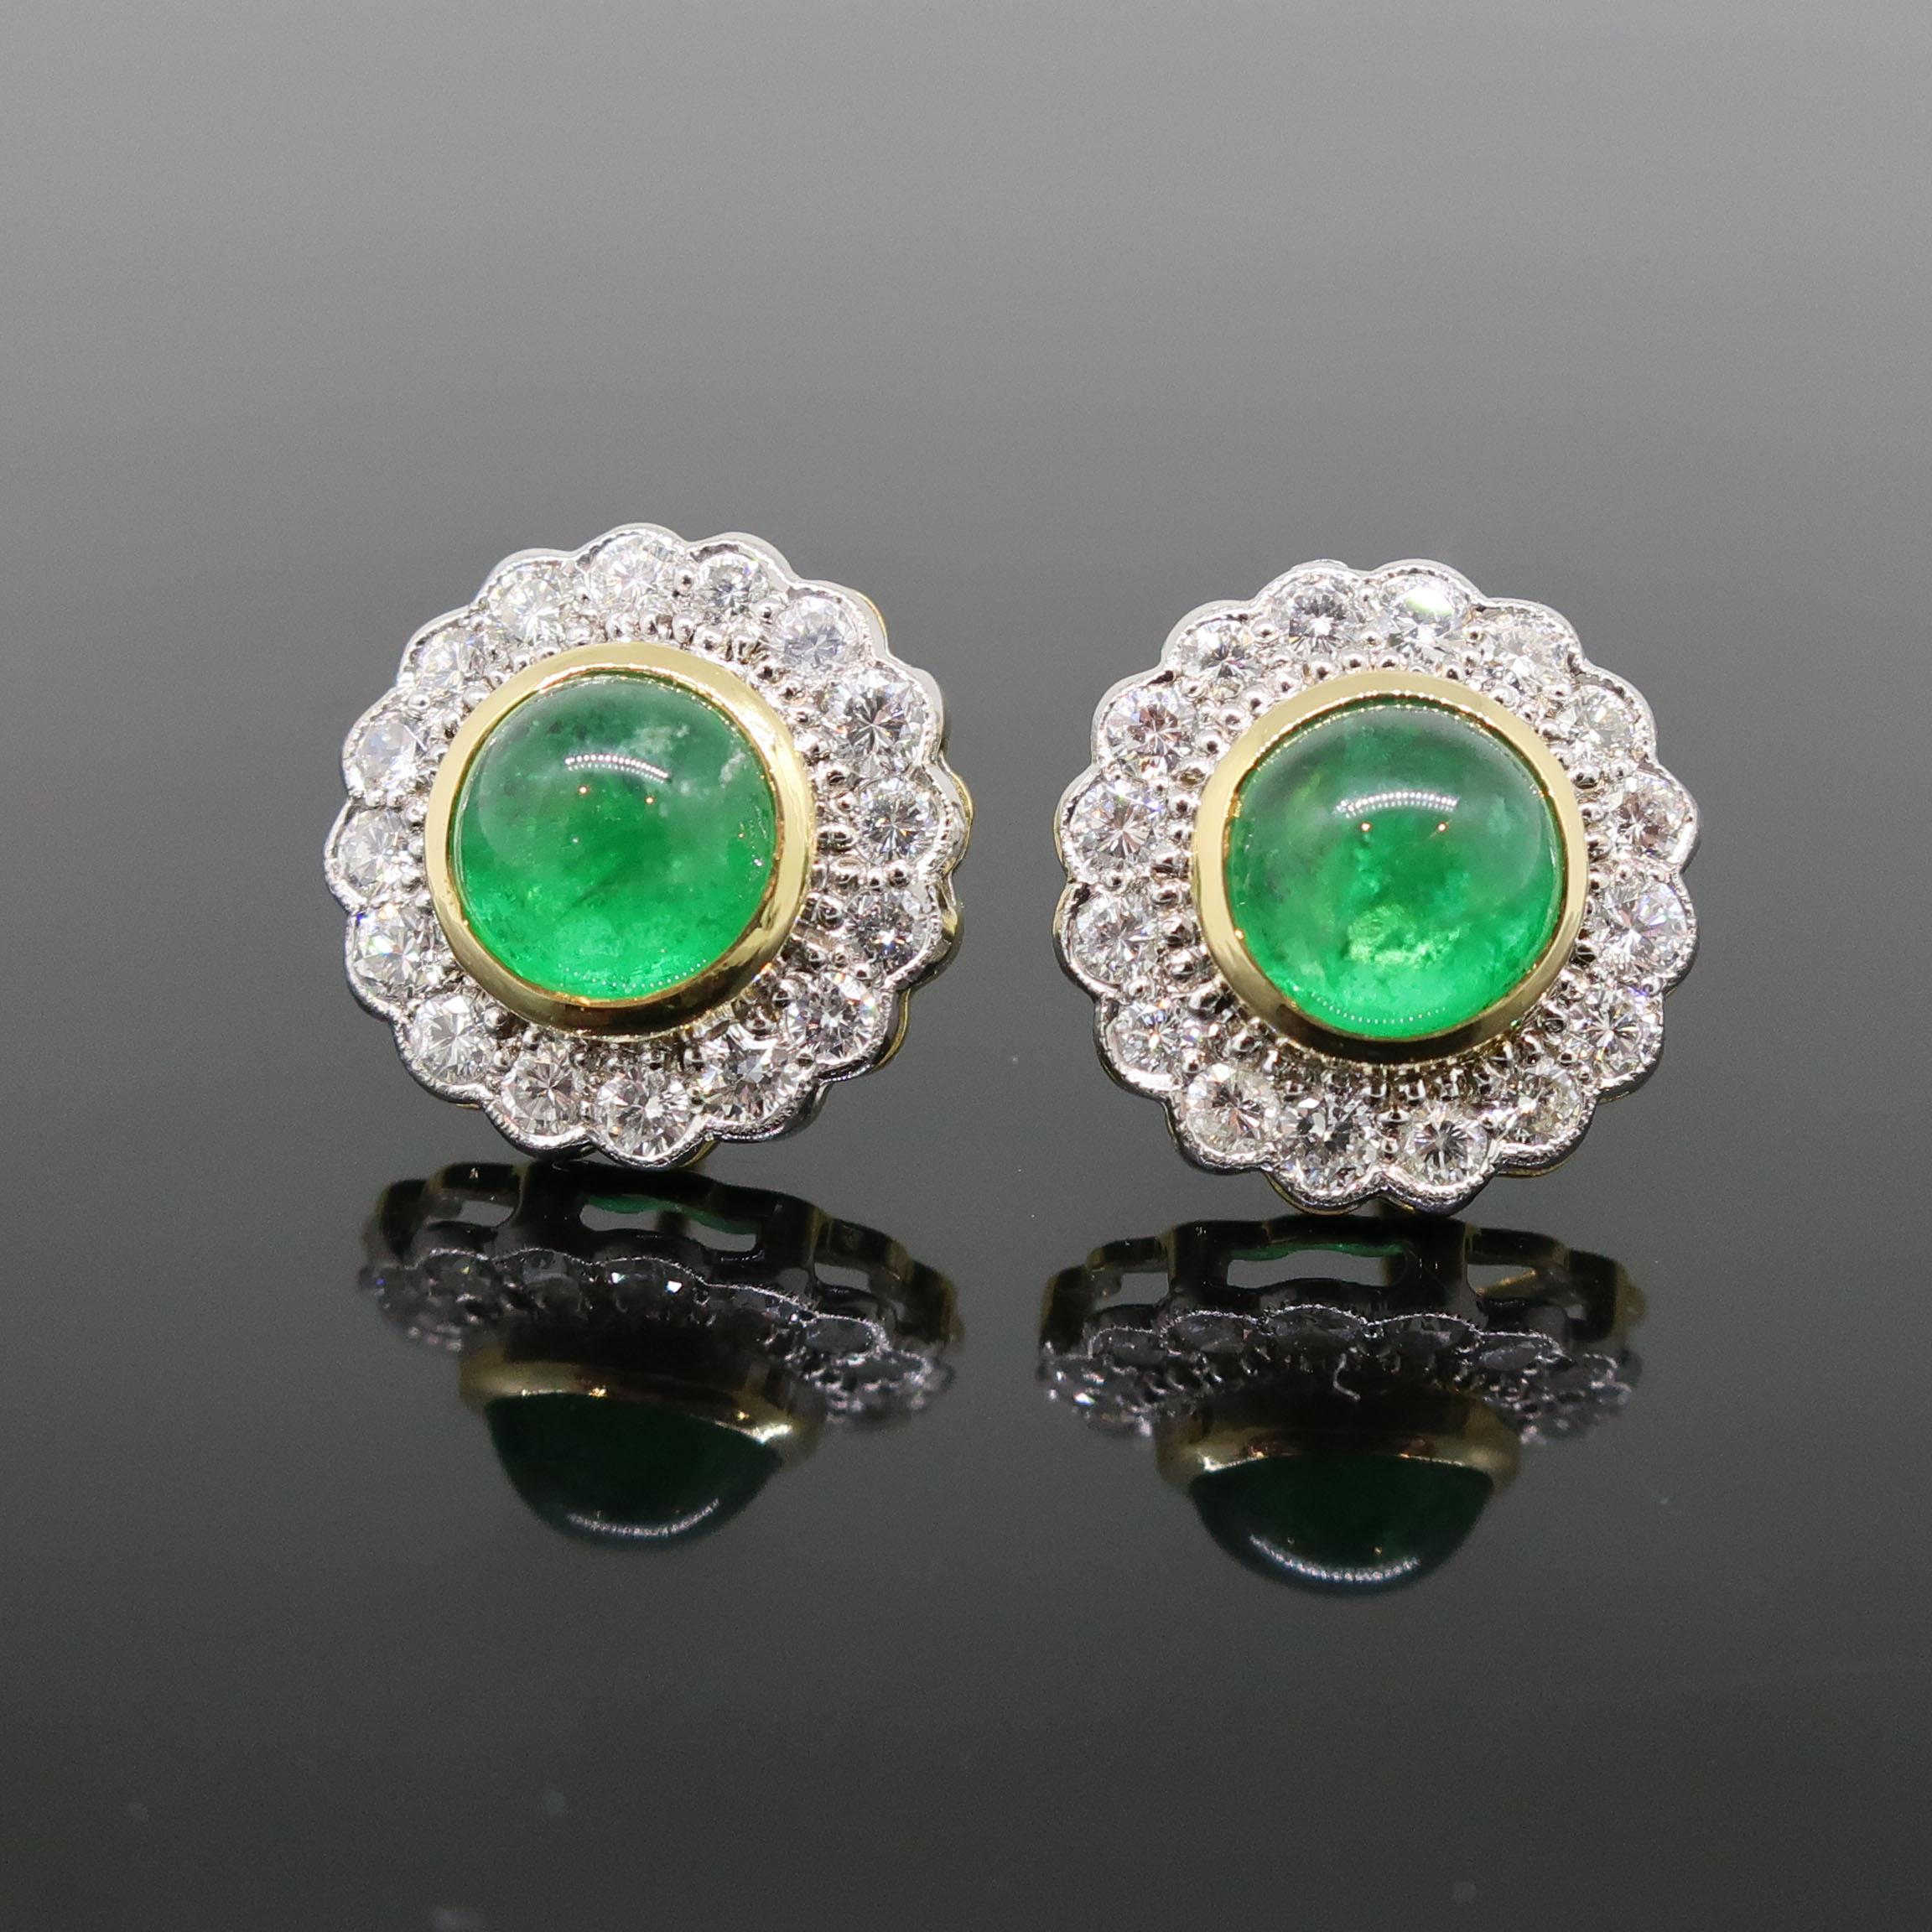 18 Karat Gold Round Cabochon Emerald and Diamond Art Deco Style Earrings For Sale 1